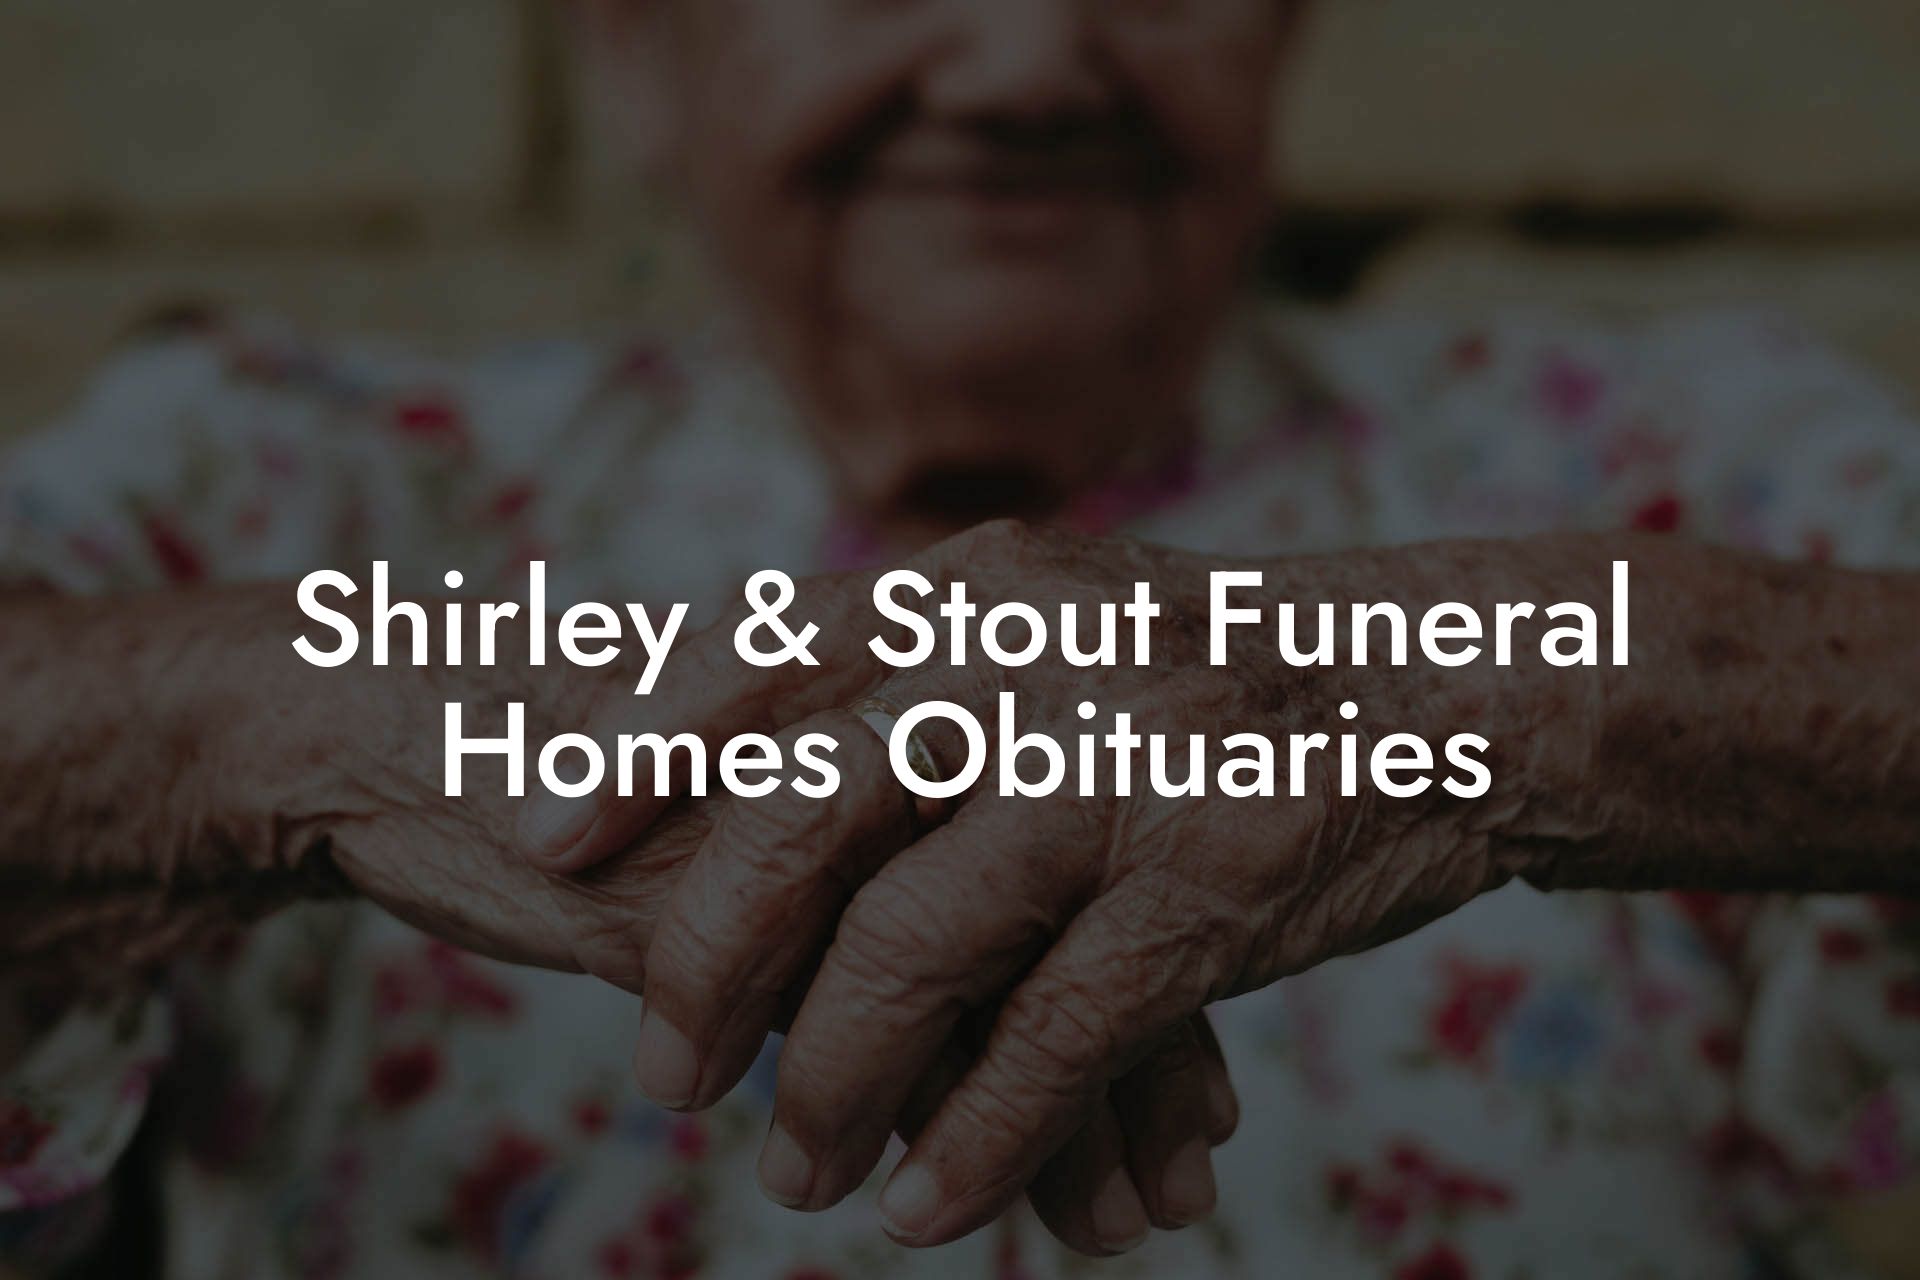 Shirley & Stout Funeral Homes Obituaries